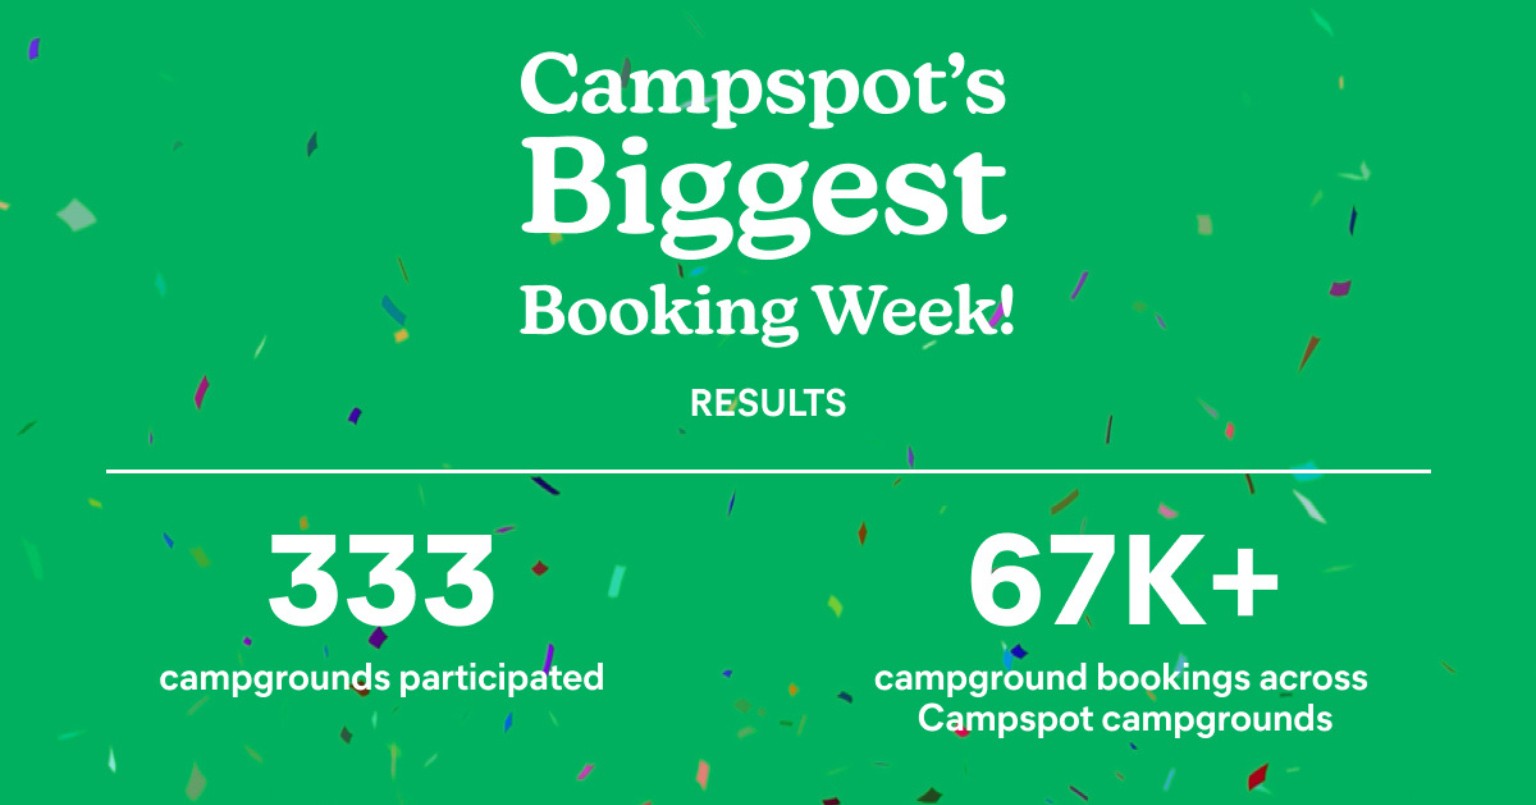 Campspot's Biggest Booking Week Gives Campgrounds a Boost and Helps Connect Them with New Campers Ahead of Summer Season